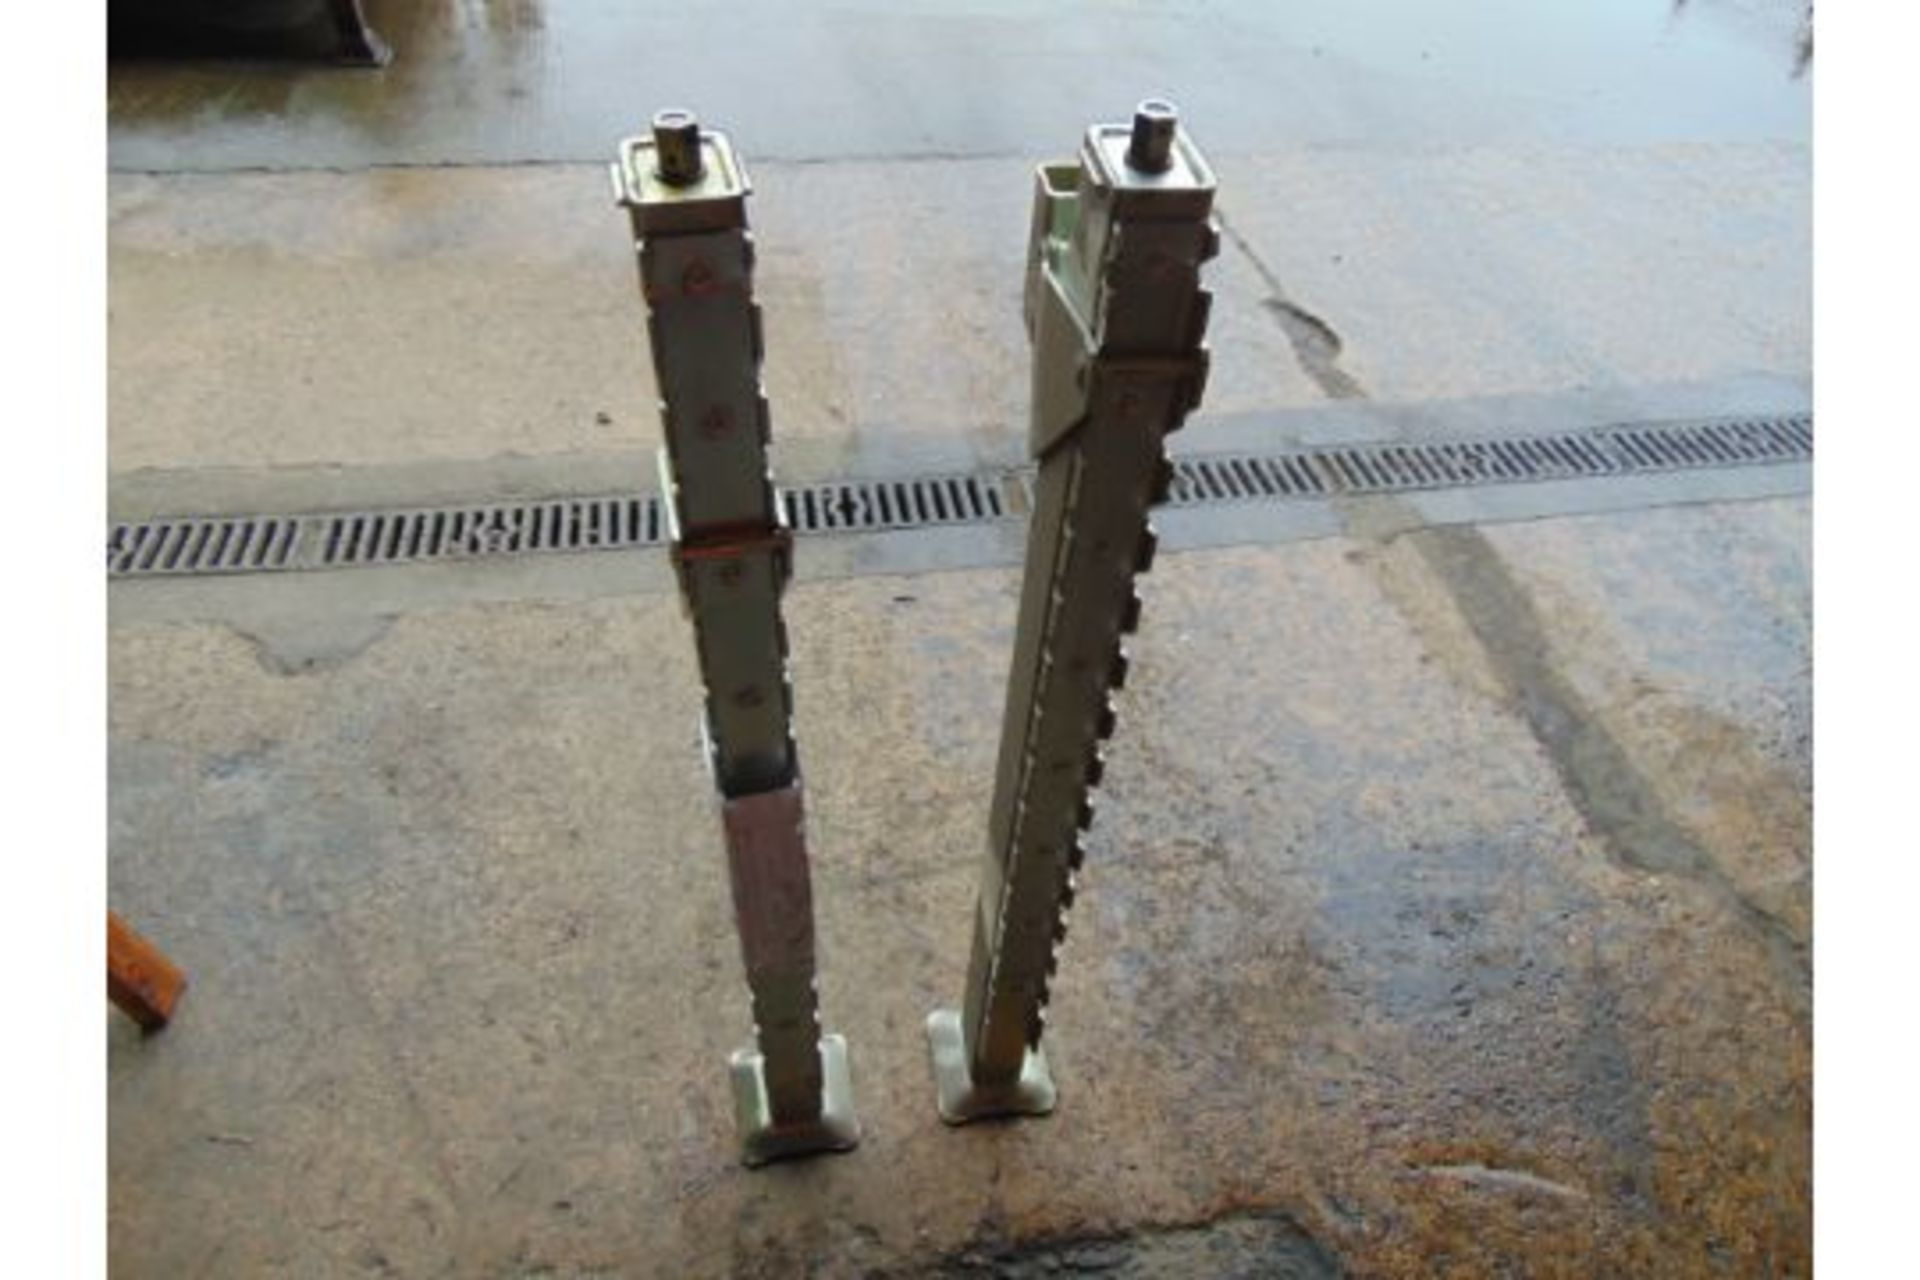 2 x New Unissued 2400kgs High Lift Screw Jacks for 4x4's etc 90cms as shown - Image 2 of 5